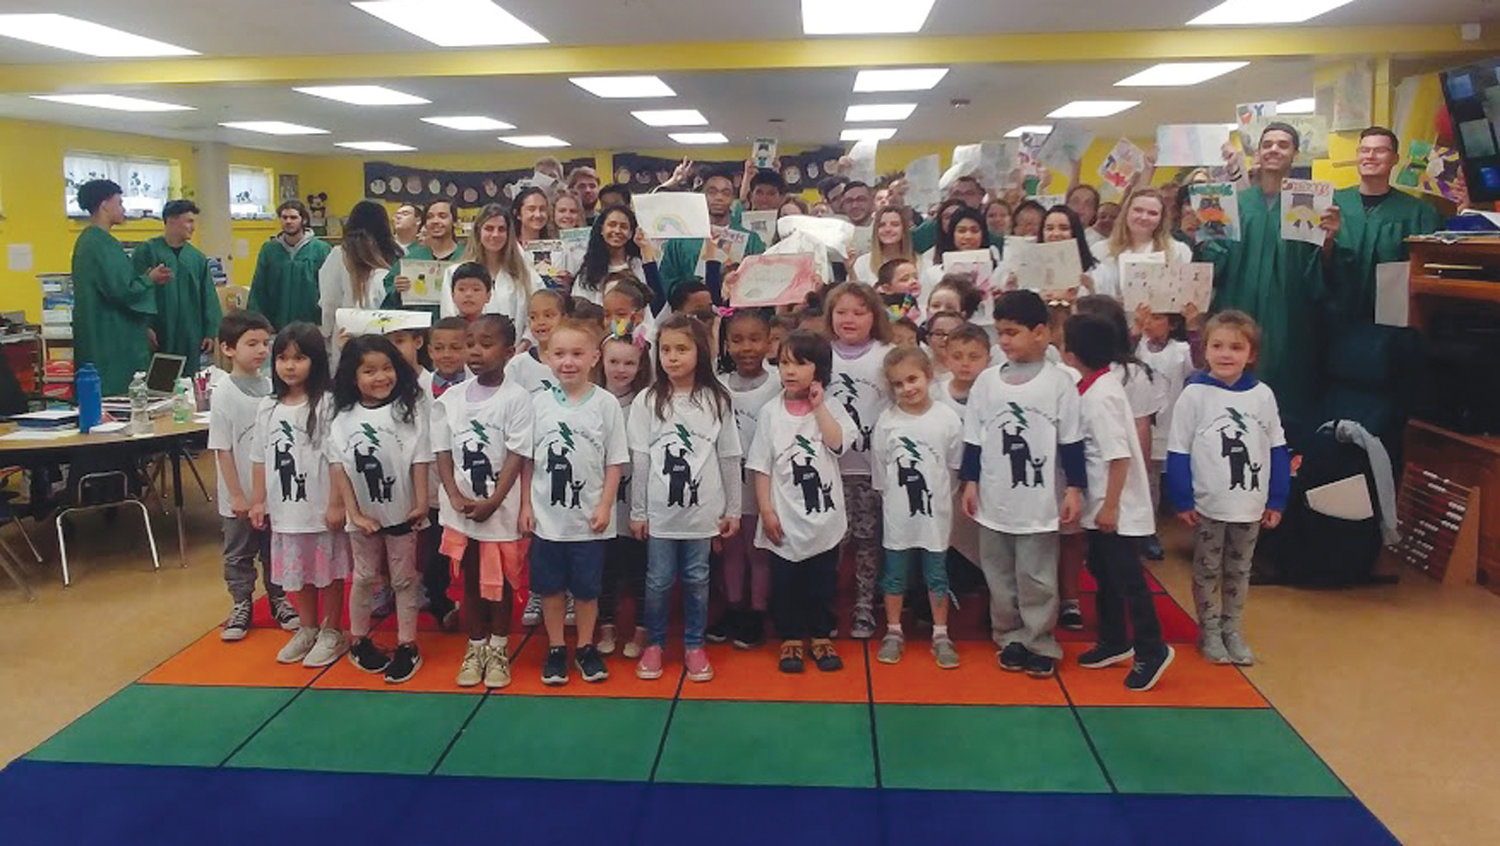 GIFTS FOR THE GRADS: The kindergarten students from Edgewood Highland Elementary School pose with the East graduates, with the kindergarteners wearing special T-shirts and the seniors holding special cards and posters.